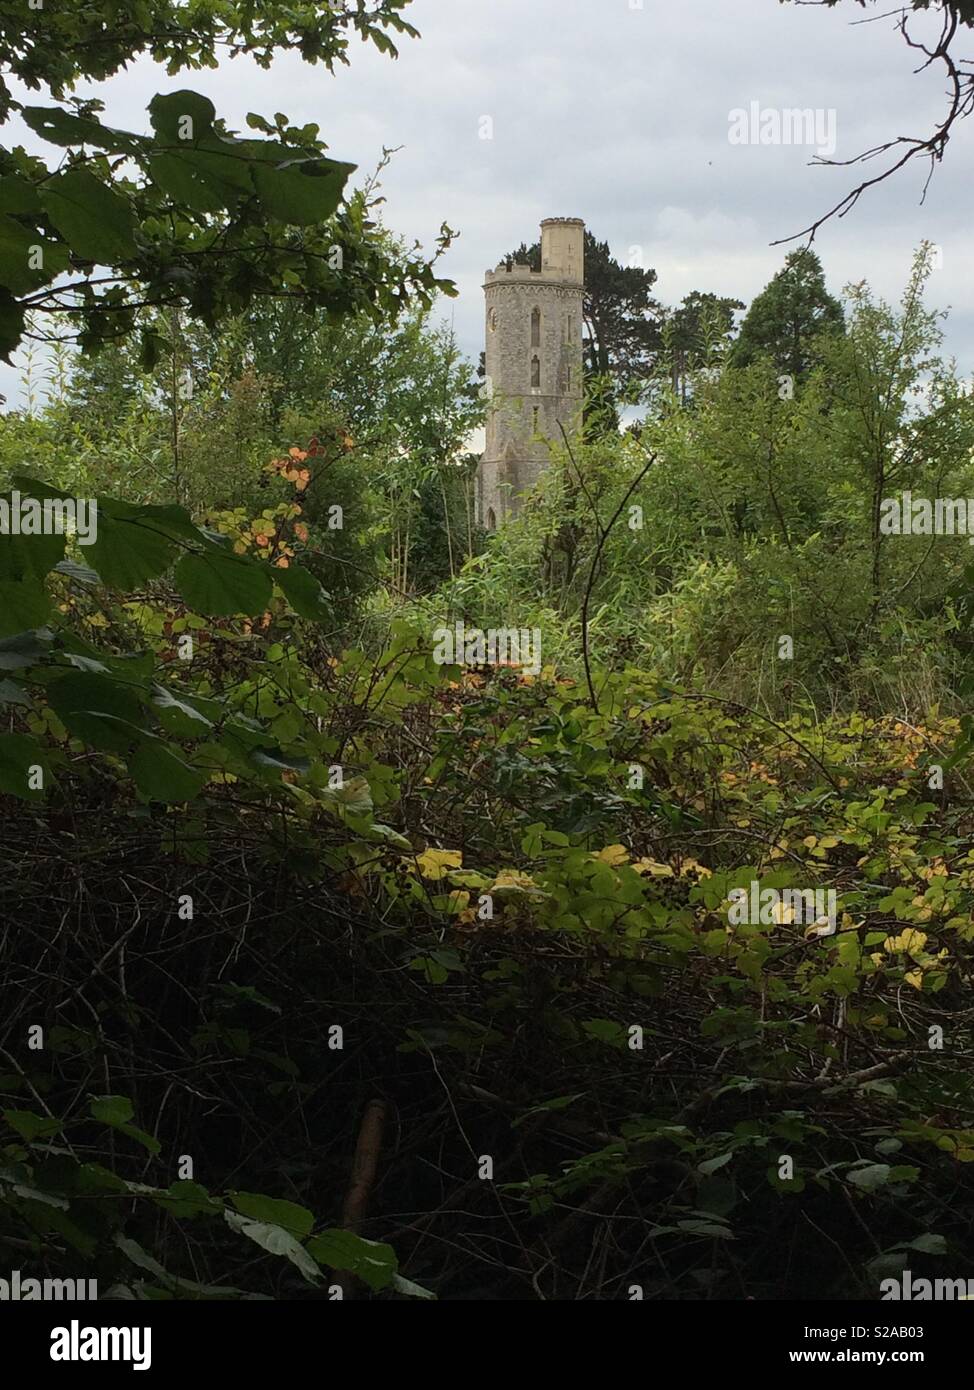 Fairytale tower in trees Stock Photo